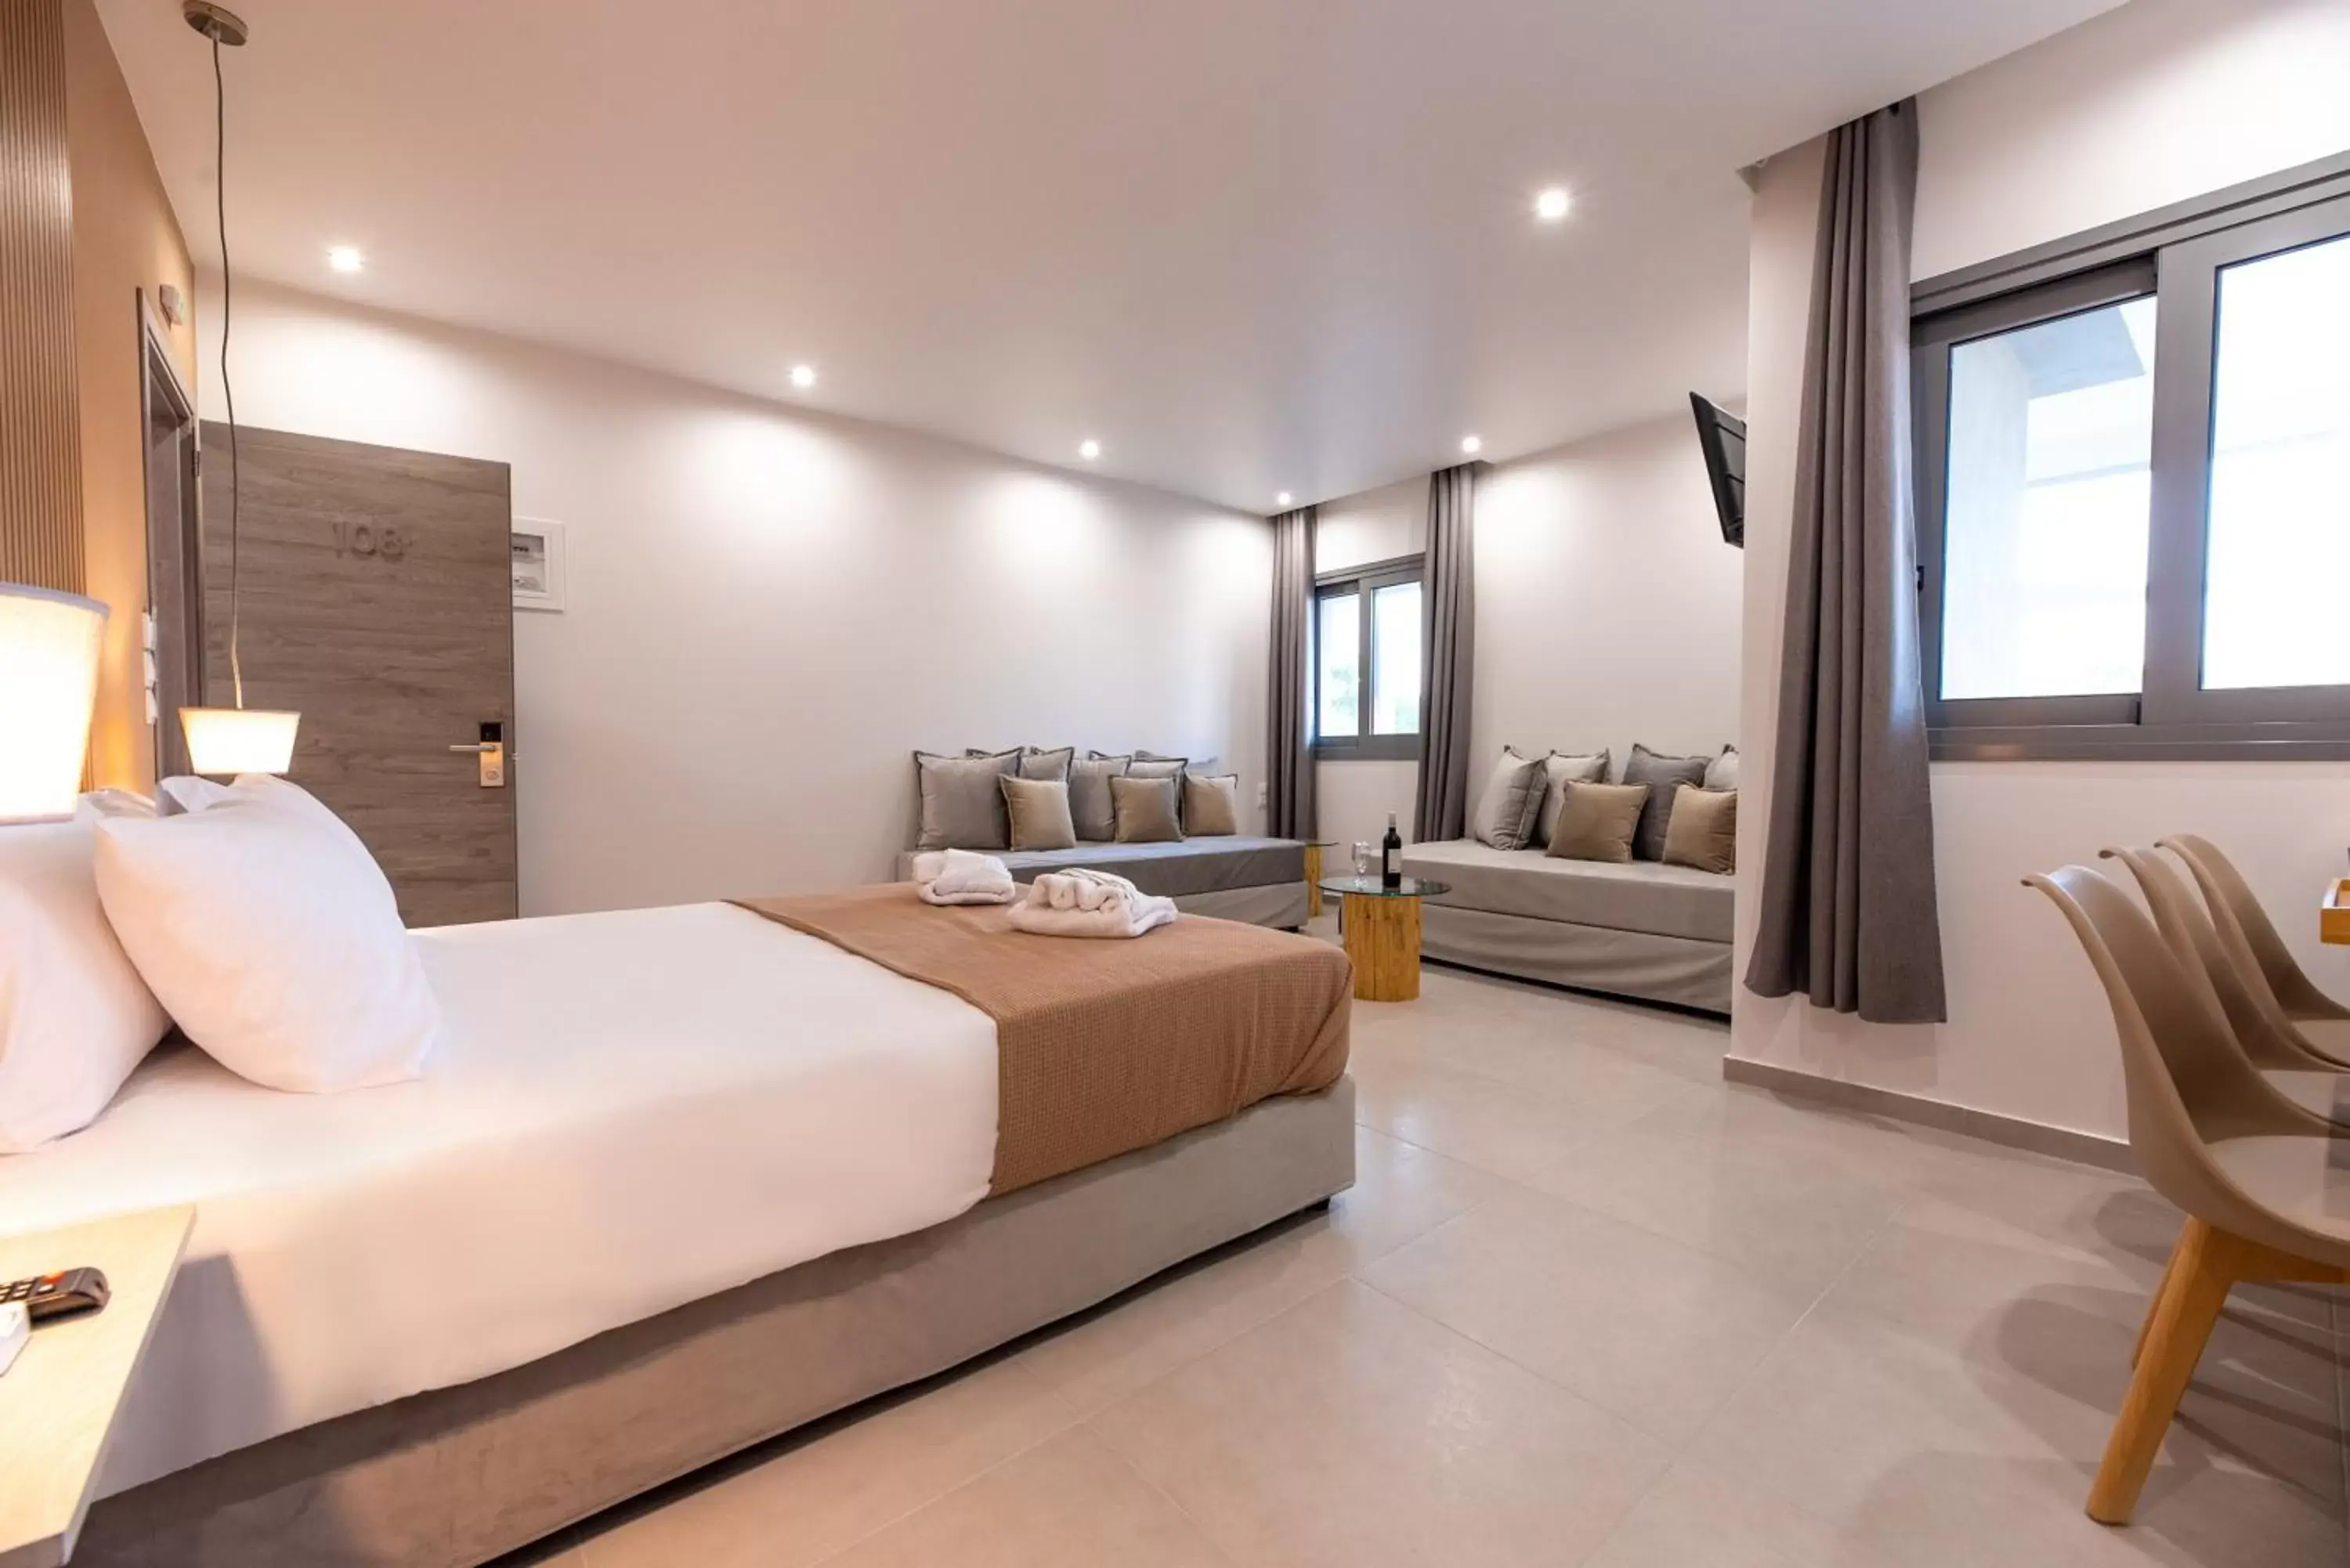 Property building, Bed in Airscape Hotel Free Shuttle From Athen's Airport